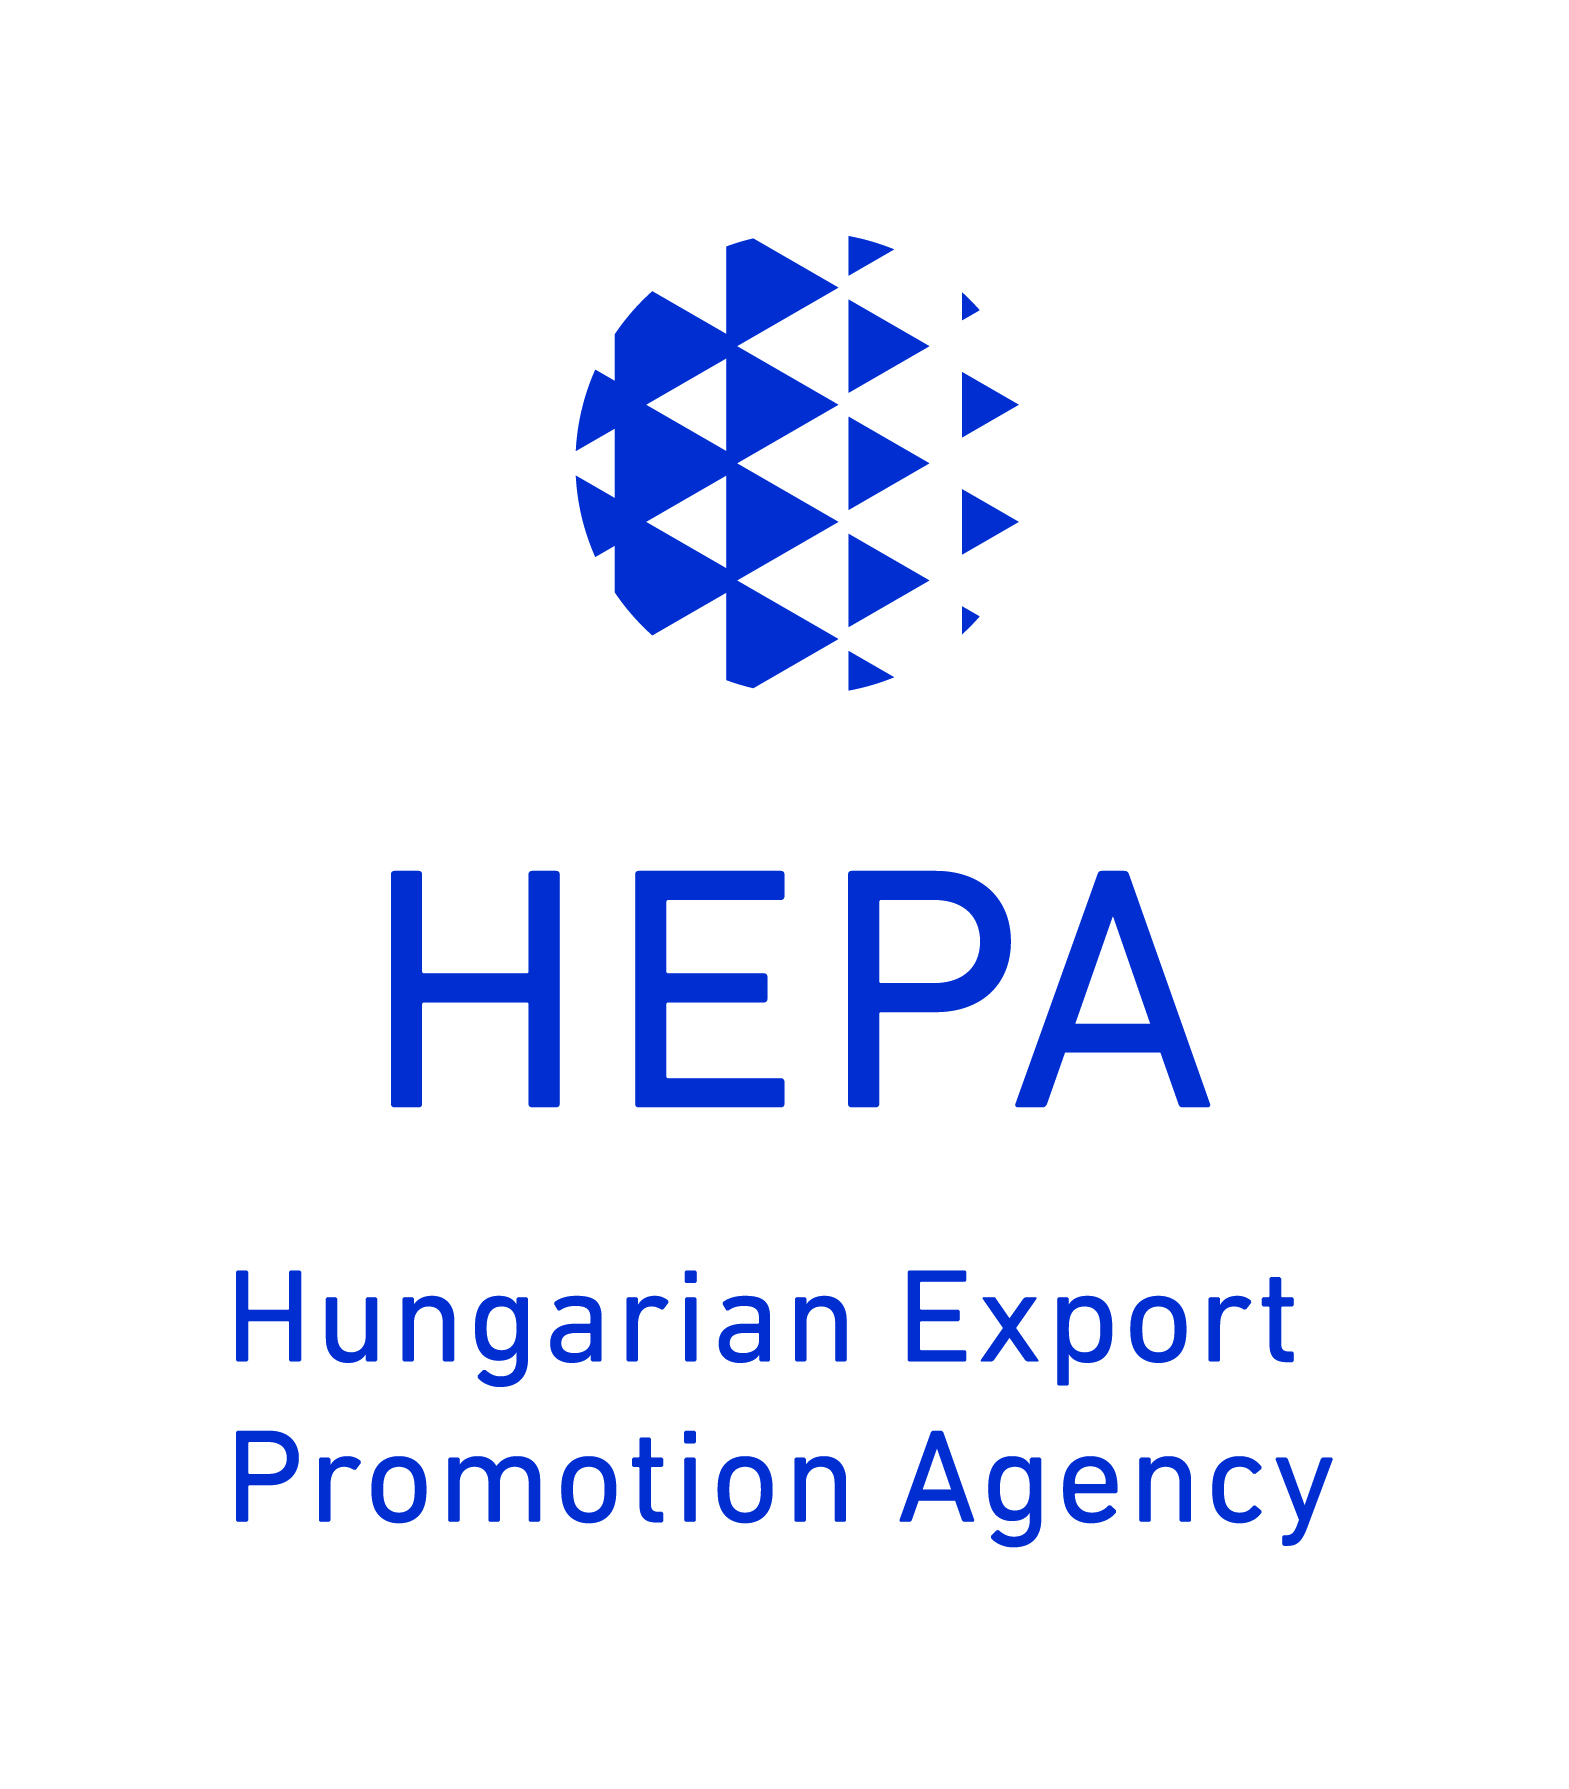 HEPA Hungarian Export Promotion Agency